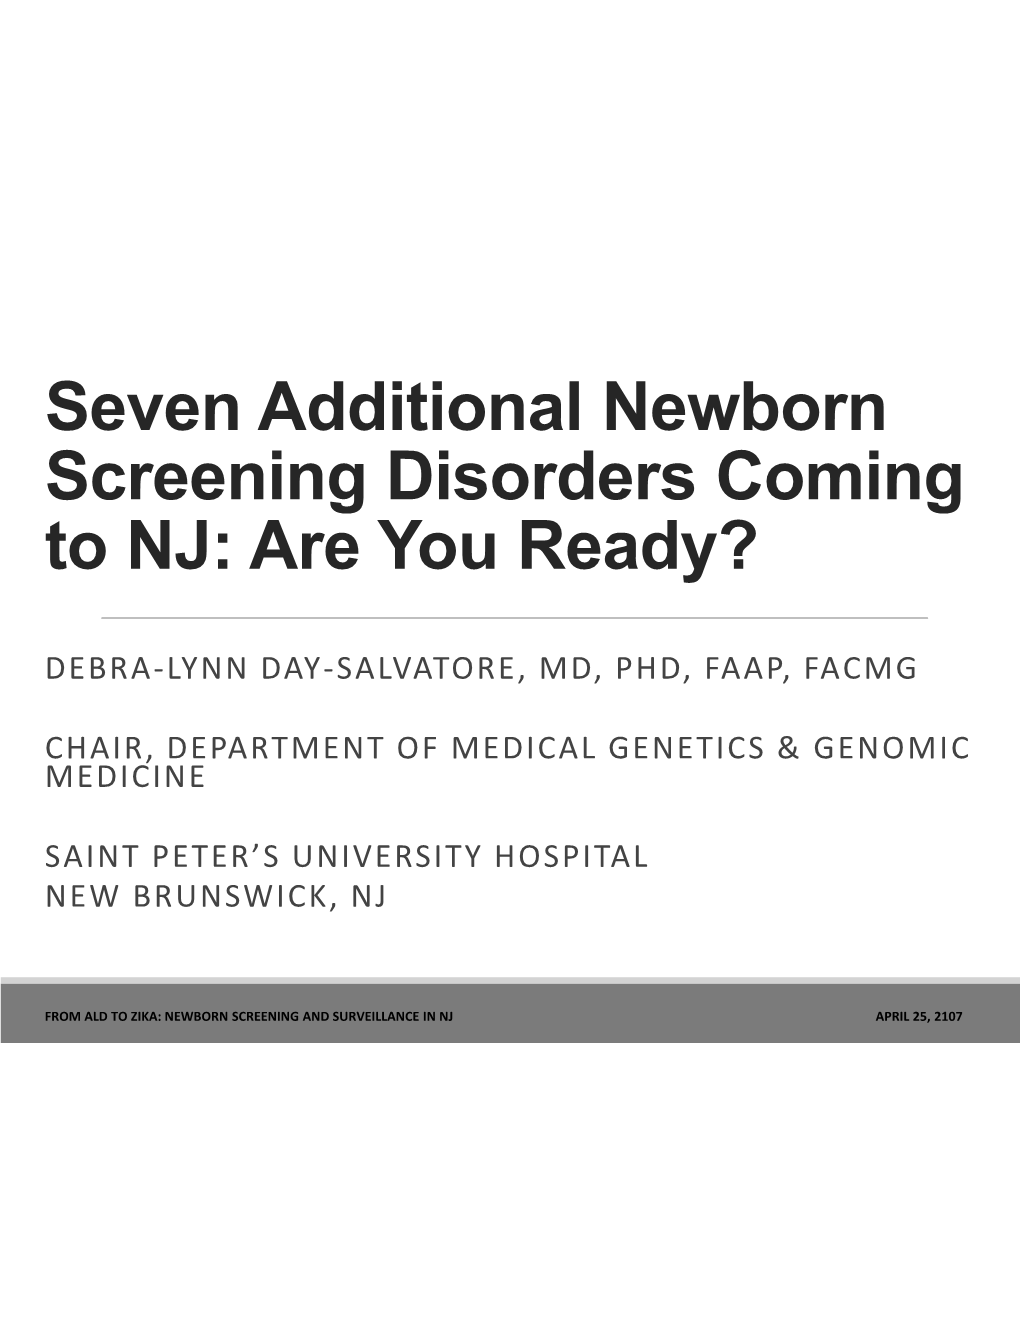 Seven Additional Newborn Screening Disorders Coming to NJ: Are You Ready?